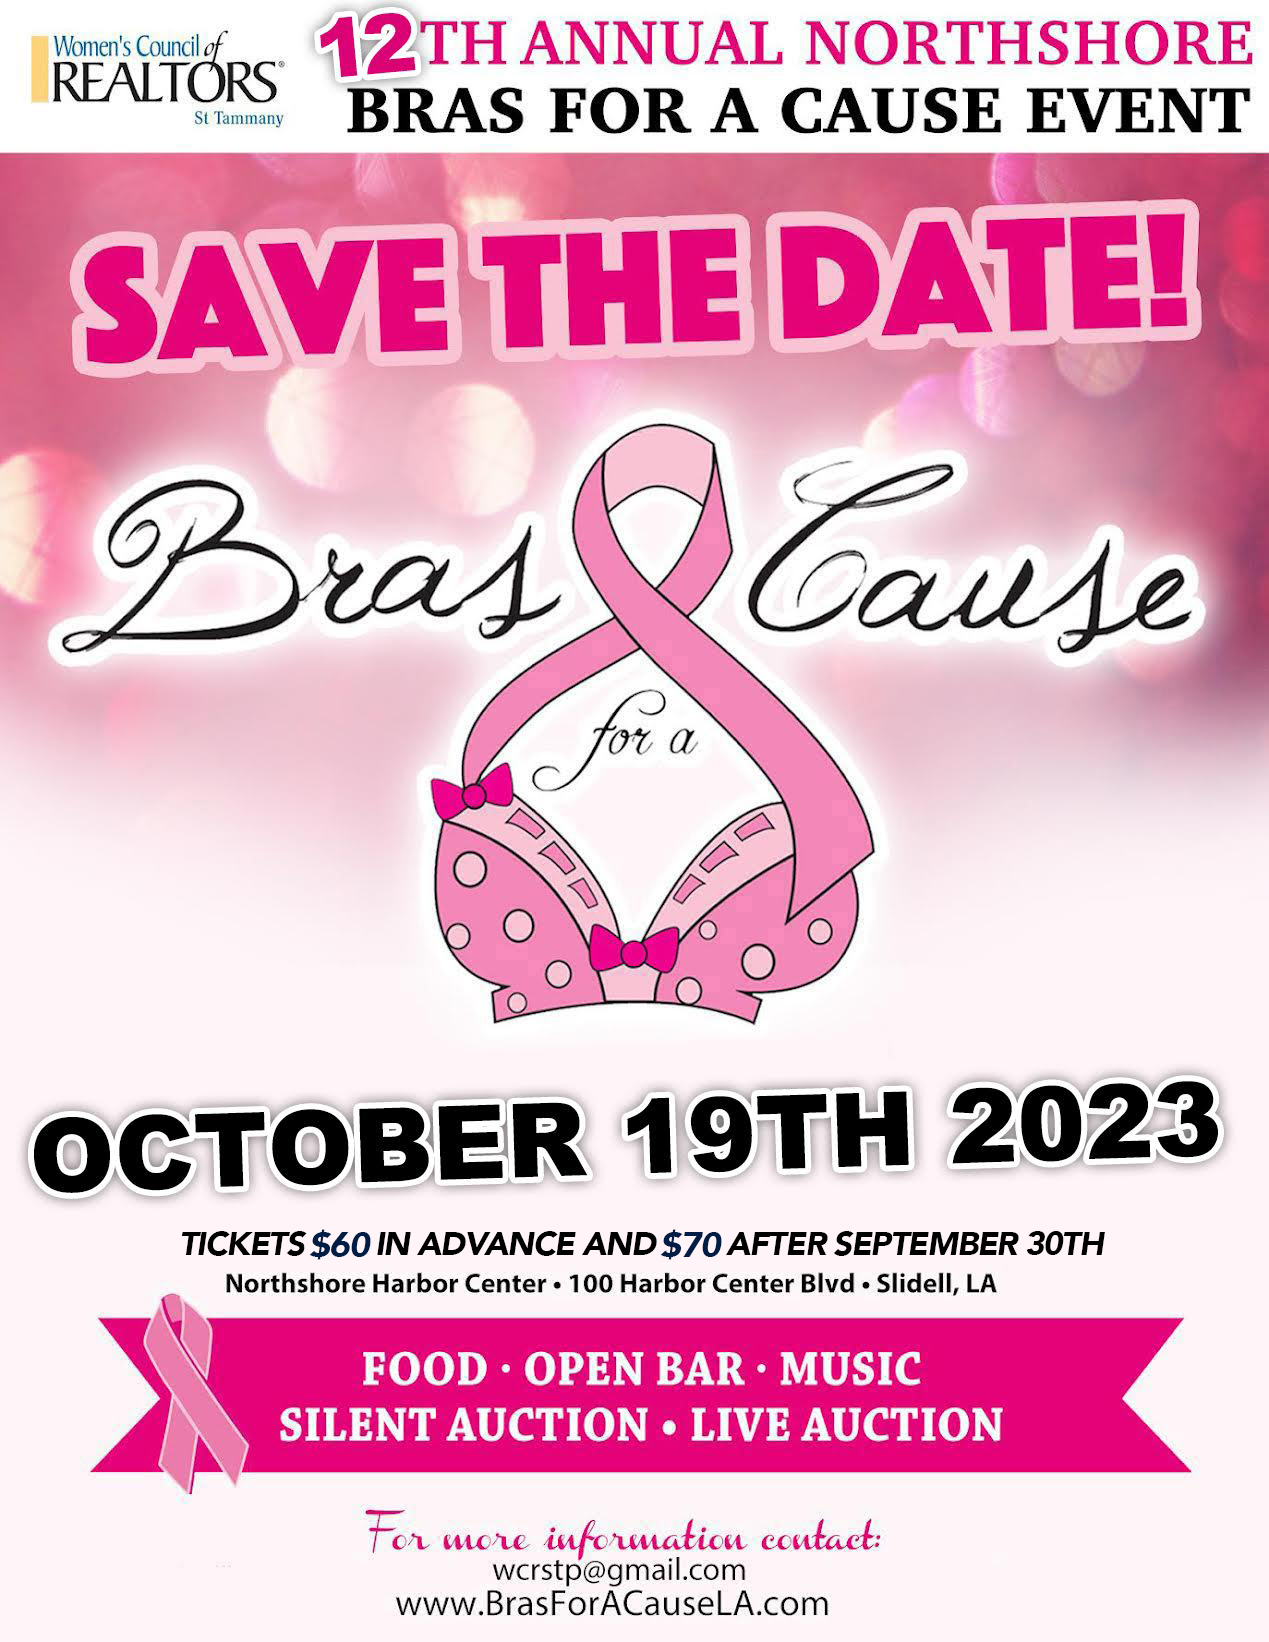 Bras for a Cause 20th Annual Fundraiser